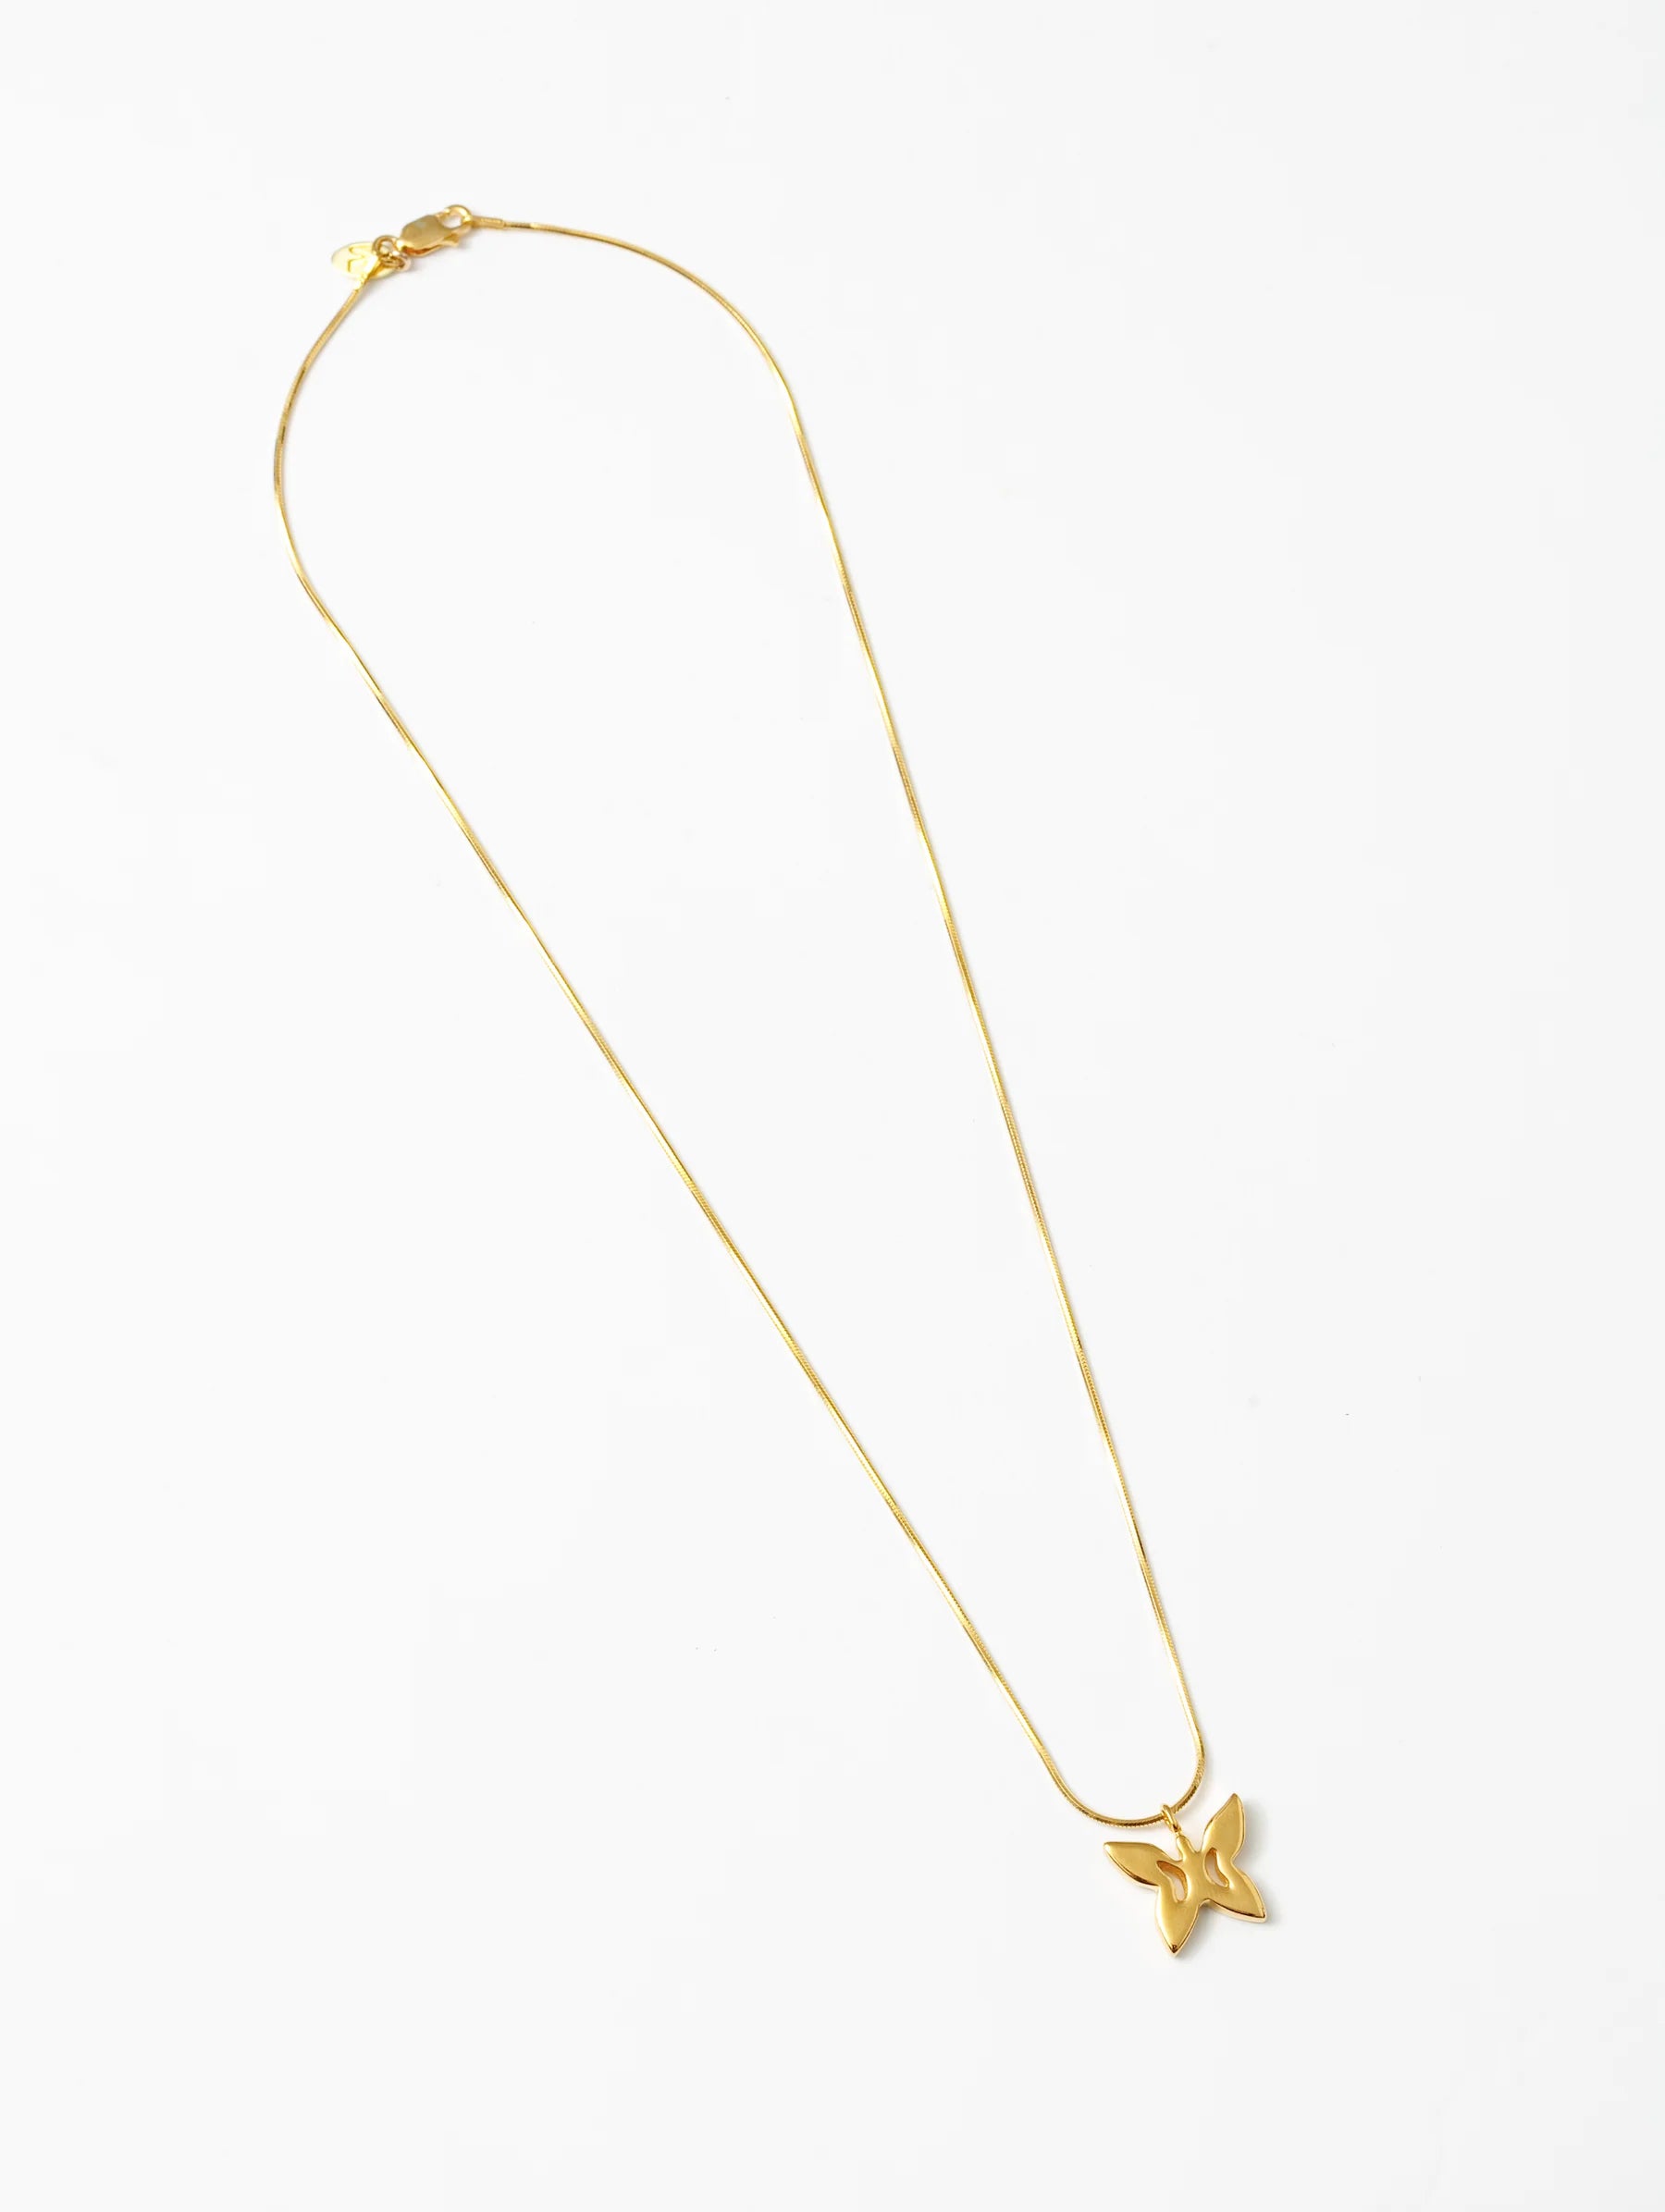 Butterfly Necklace: Gold